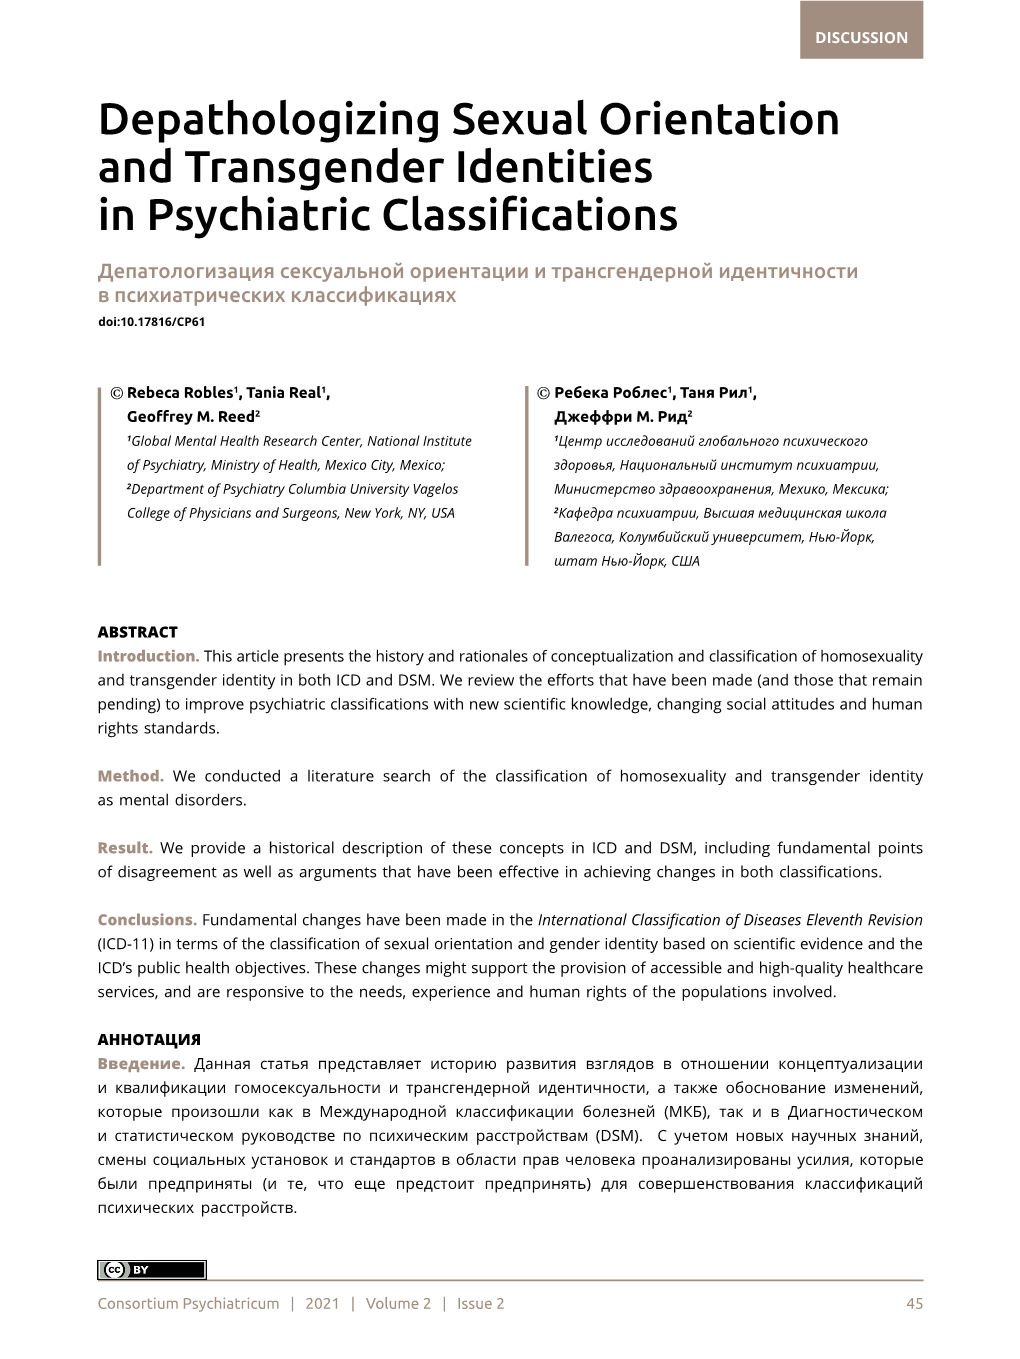 Depathologizing Sexual Orientation and Transgender Identities in Psychiatric Classifications